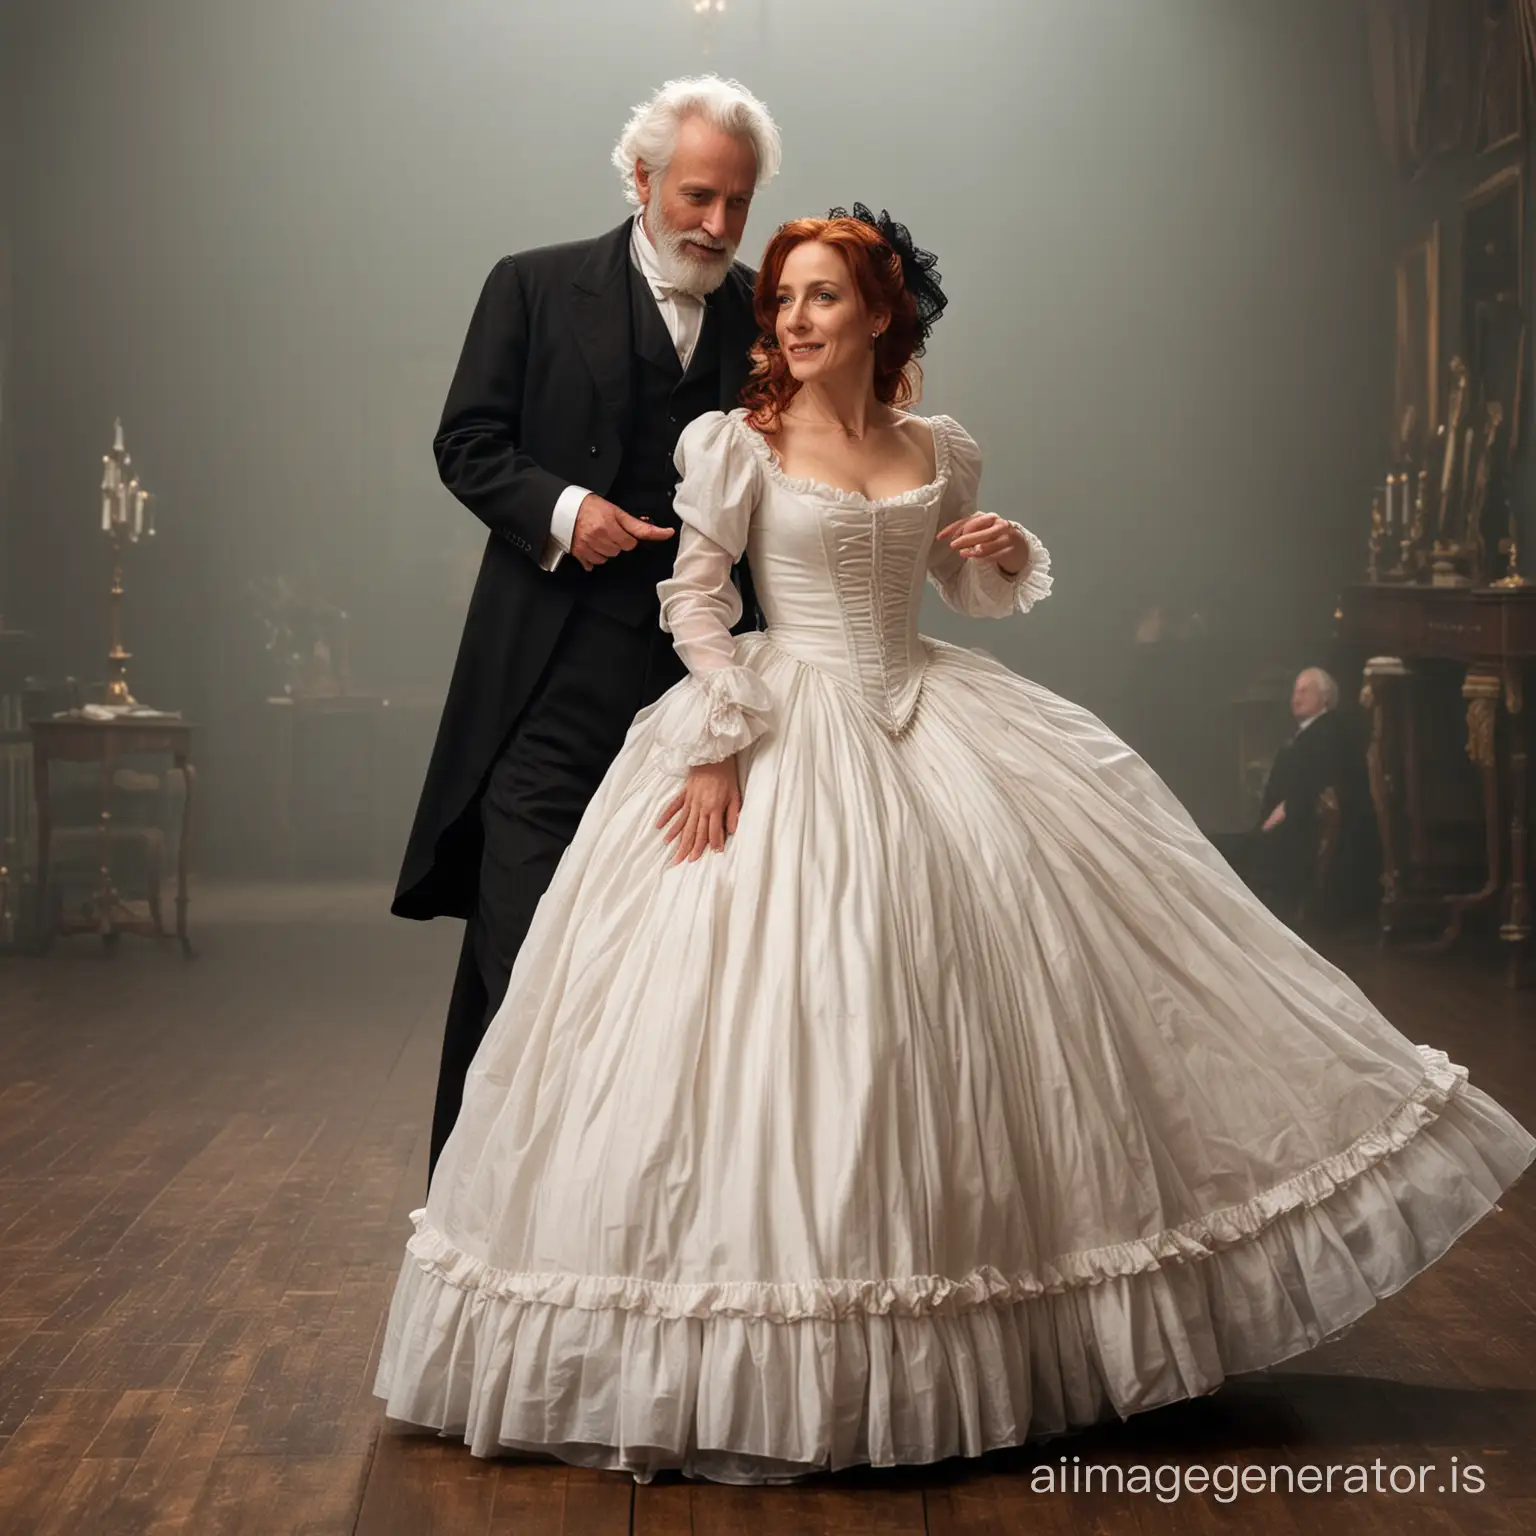 Victorian-Newlyweds-Dance-Elegant-Redhaired-Bride-and-Dapper-Groom